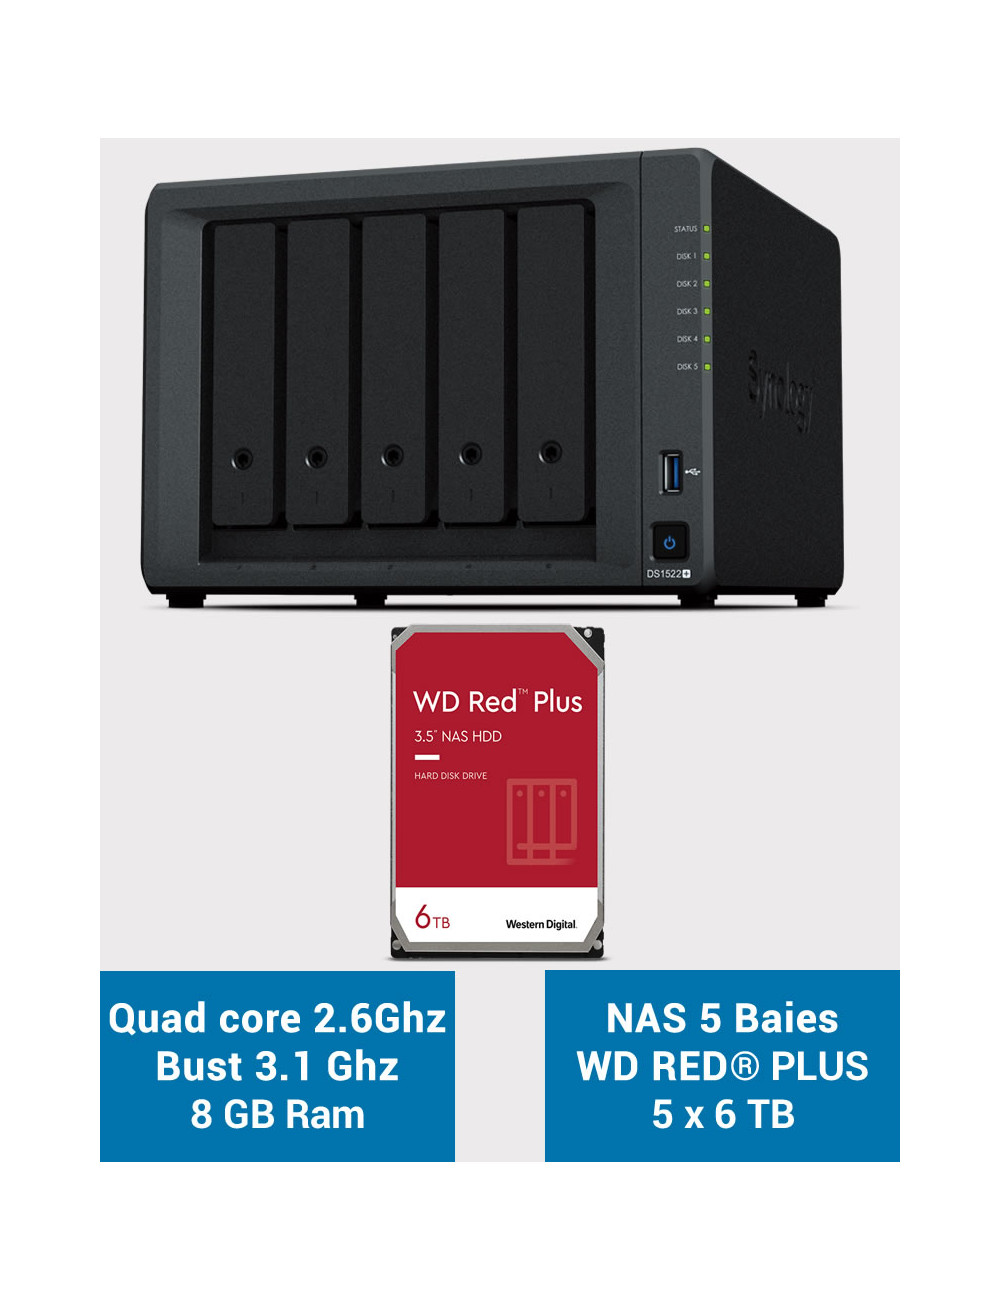 Synology DiskStation® DS1522+ NAS Server WD RED PLUS 30TB (5x6TB)